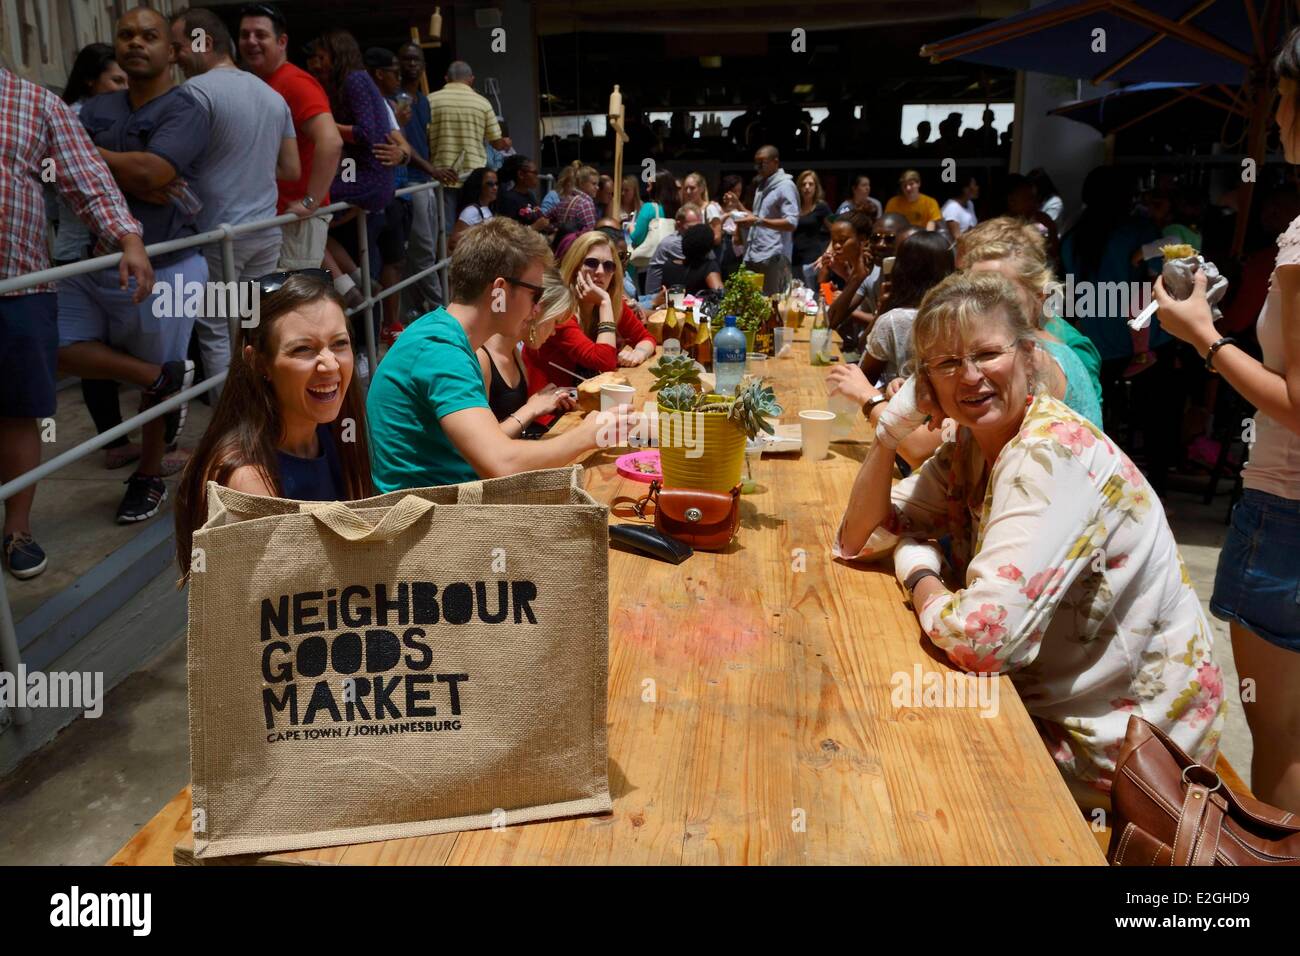 South Africa Gauteng province Johannesburg Braamfontein district Neighbourgoods Market on saturdays is as much a source for farm fresh foods and specialty goods as it is a meeting point to enjoy community swop ideas and stories and be inspired by energy t Stock Photo